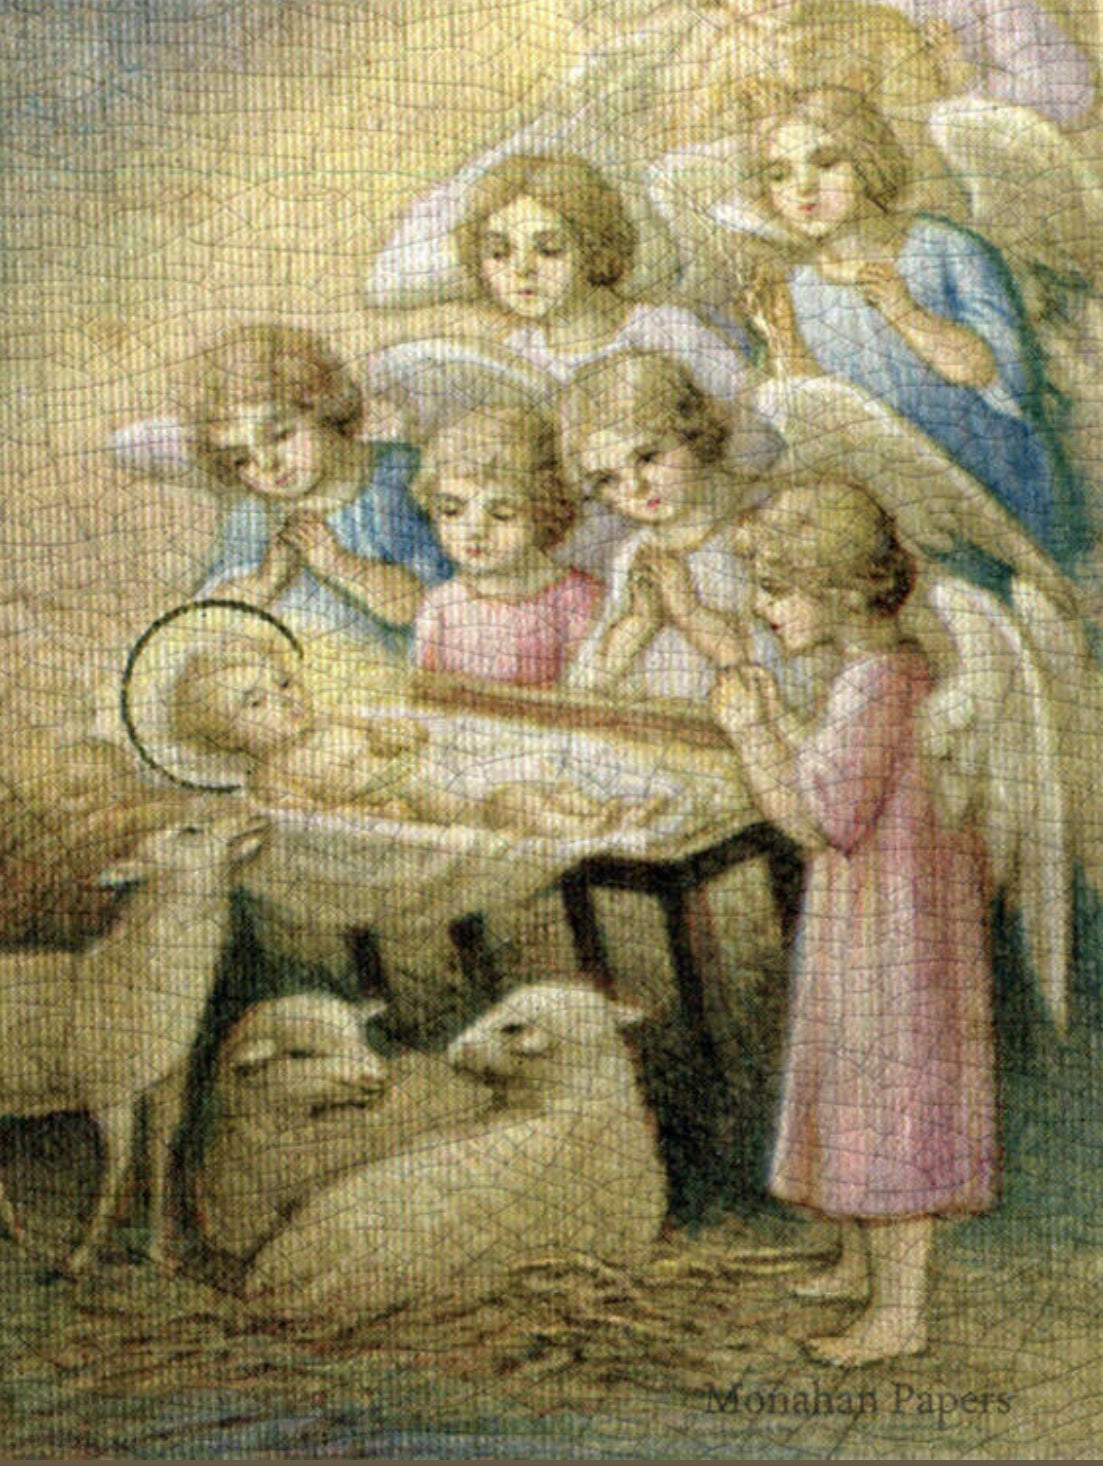 Lambs in a Manger - C344